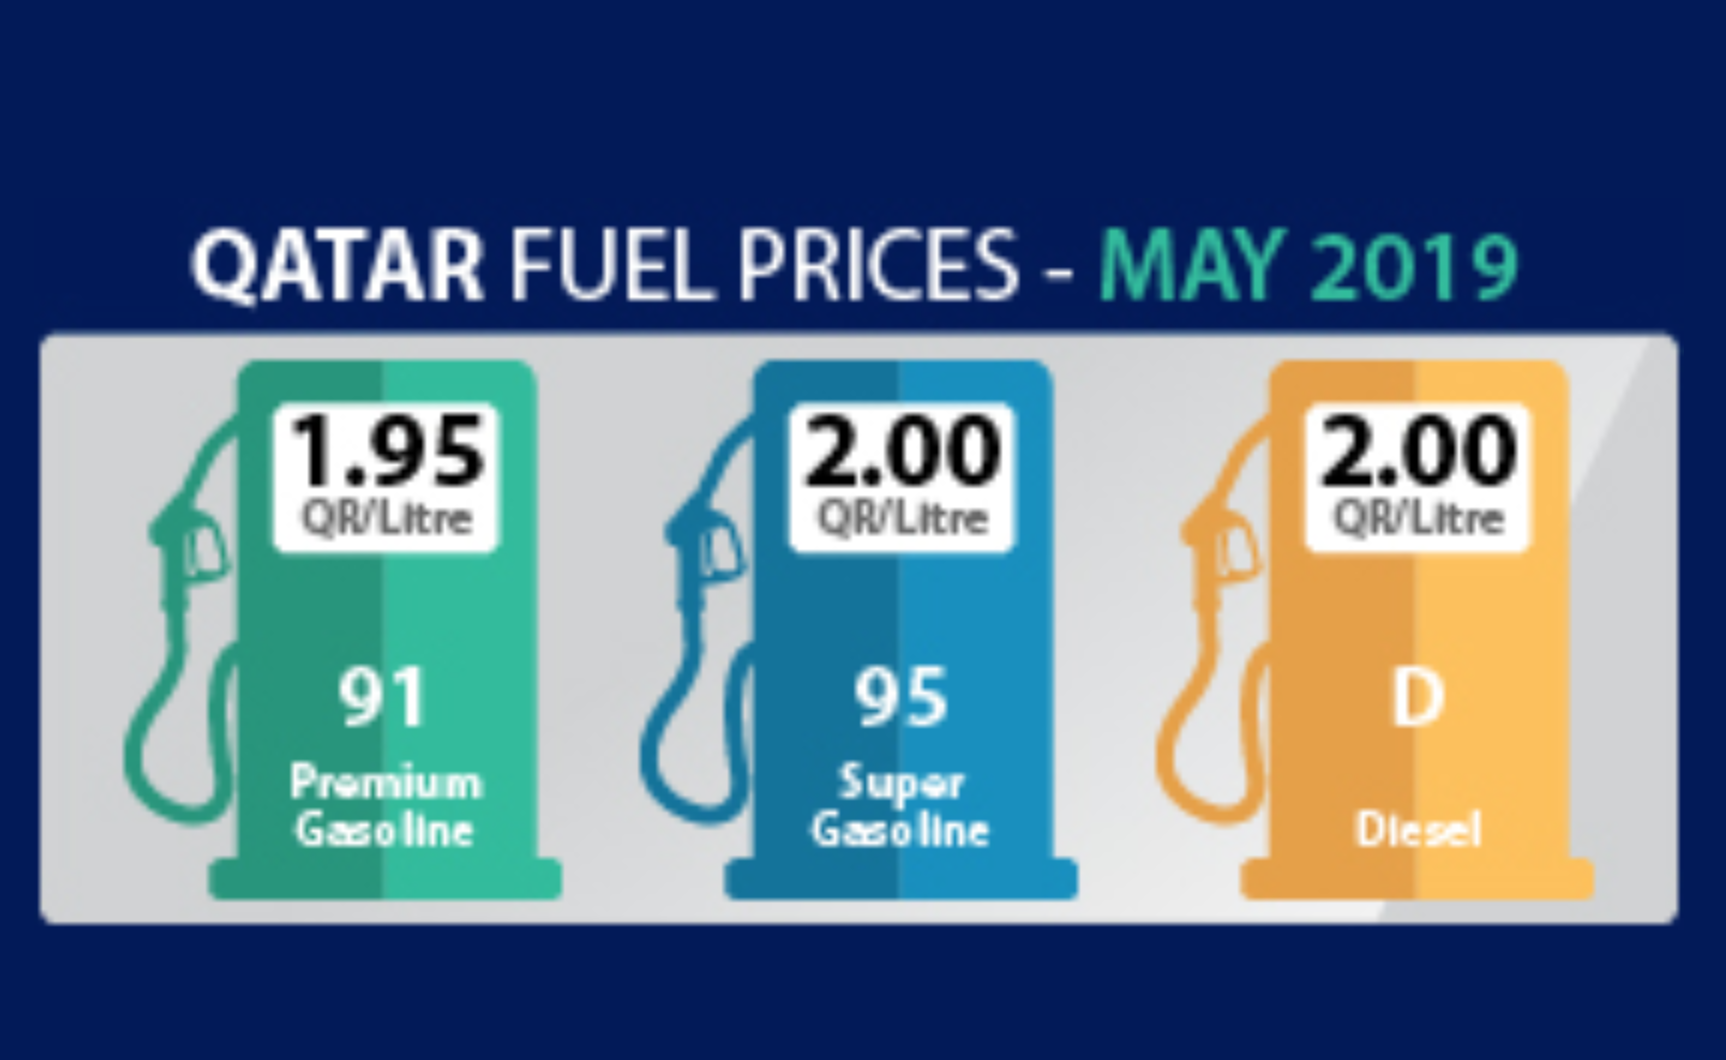 Fuel prices to go up again in May